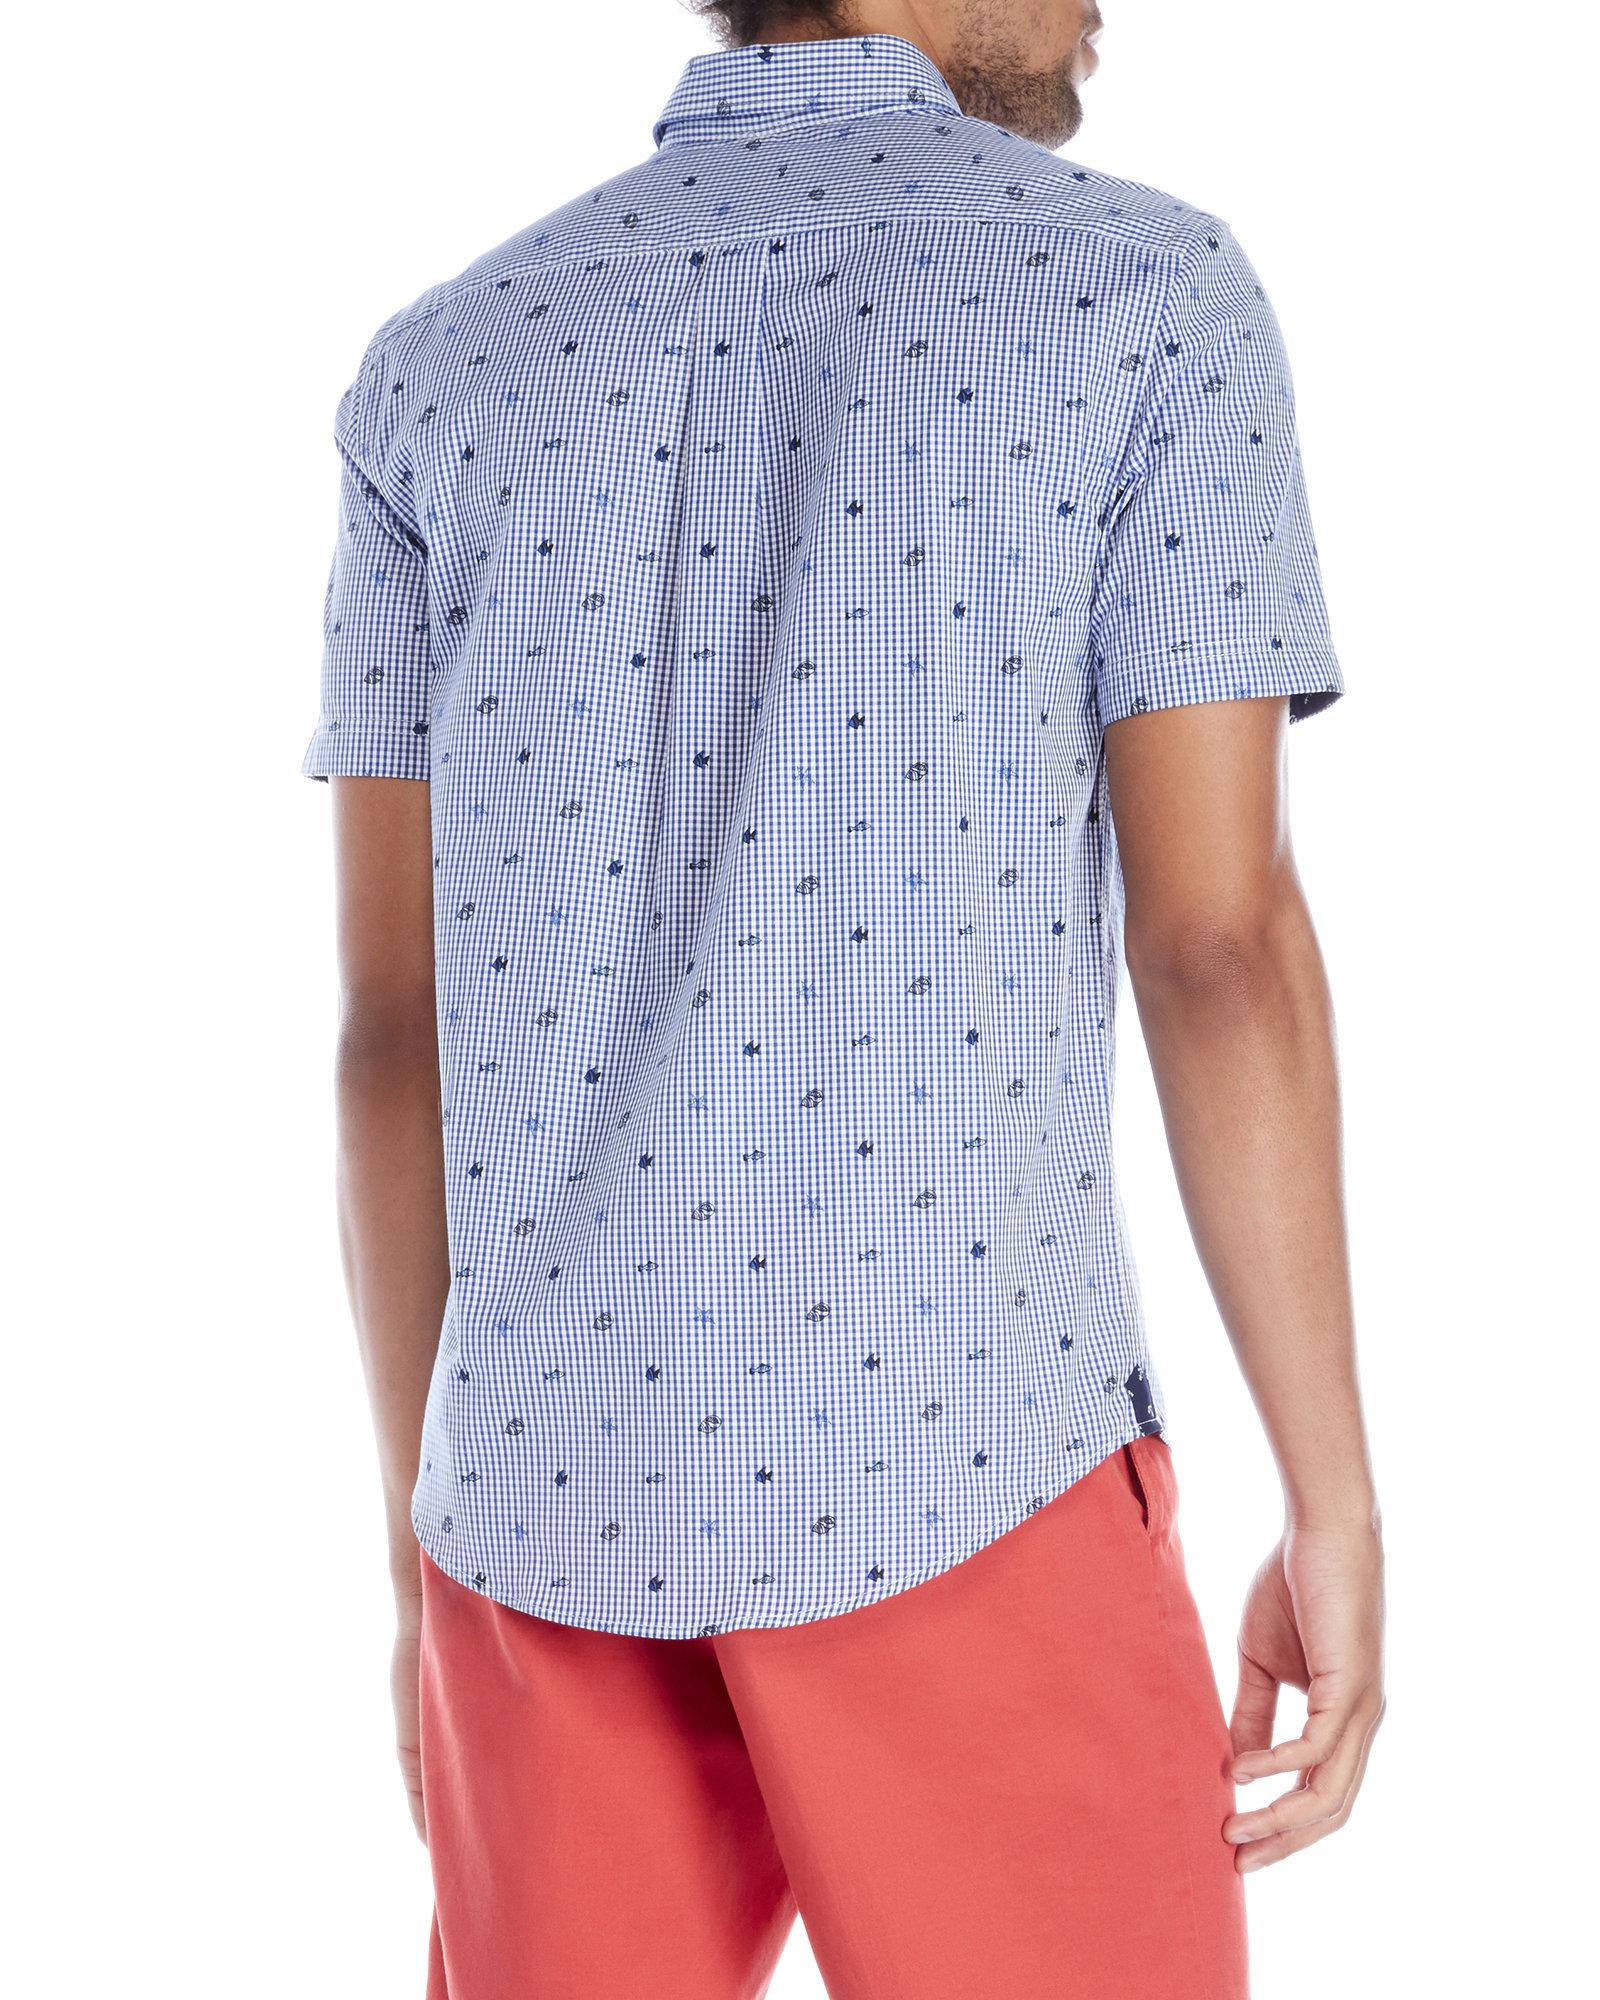 Lyst - Report Collection Gingham Fish Button-Down Shirt in Blue for Men